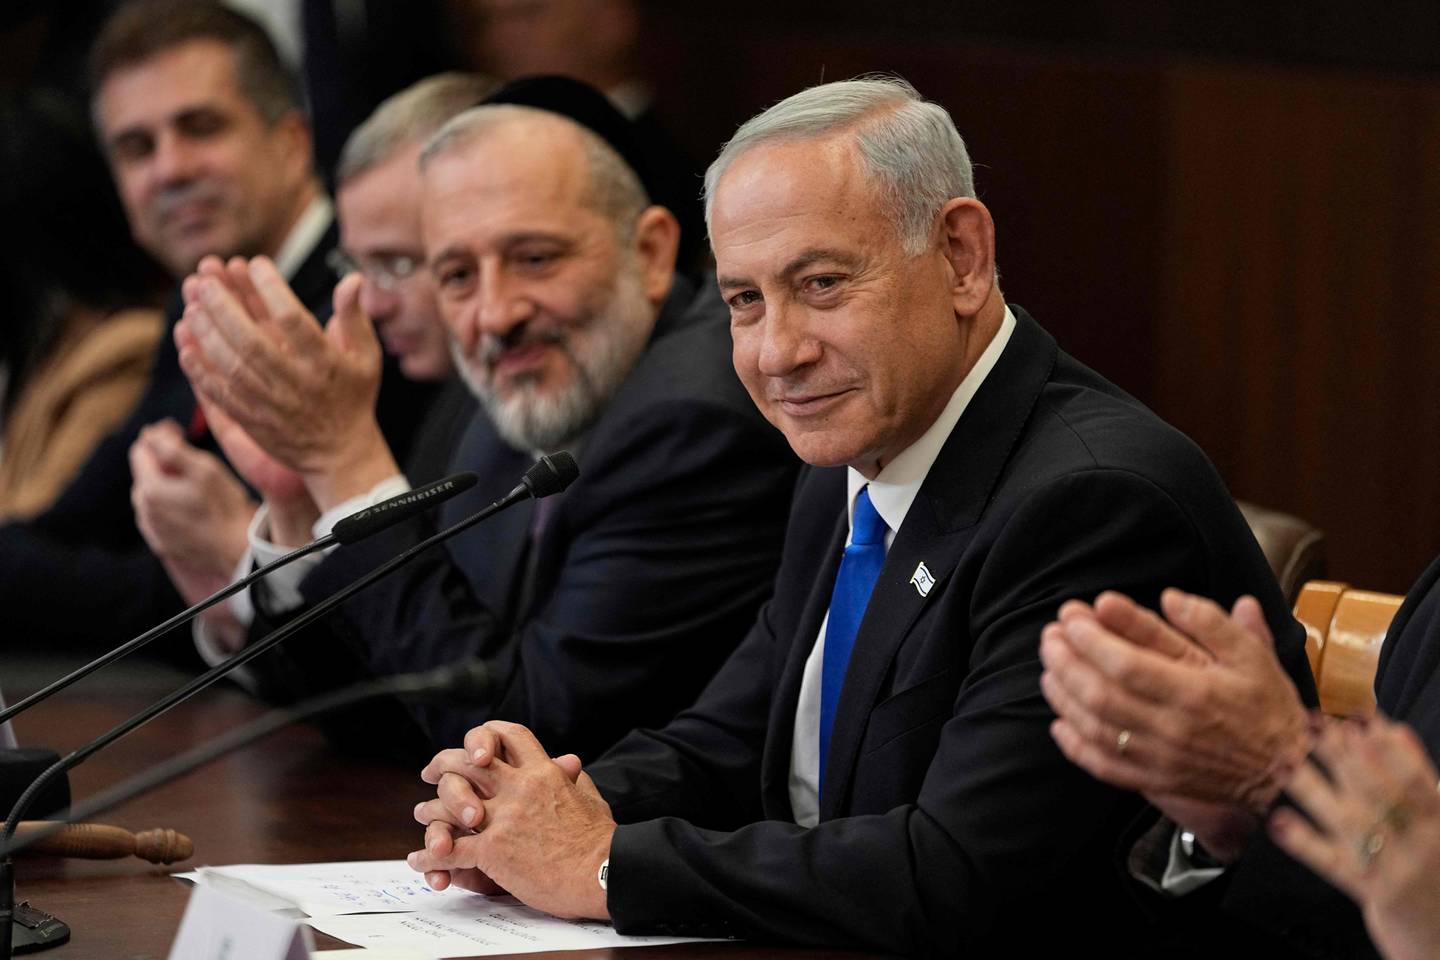 Israeli Prime Minister Benjamin Netanyahu chairs the first cabinet meeting of his new government in Jerusalem. AFP